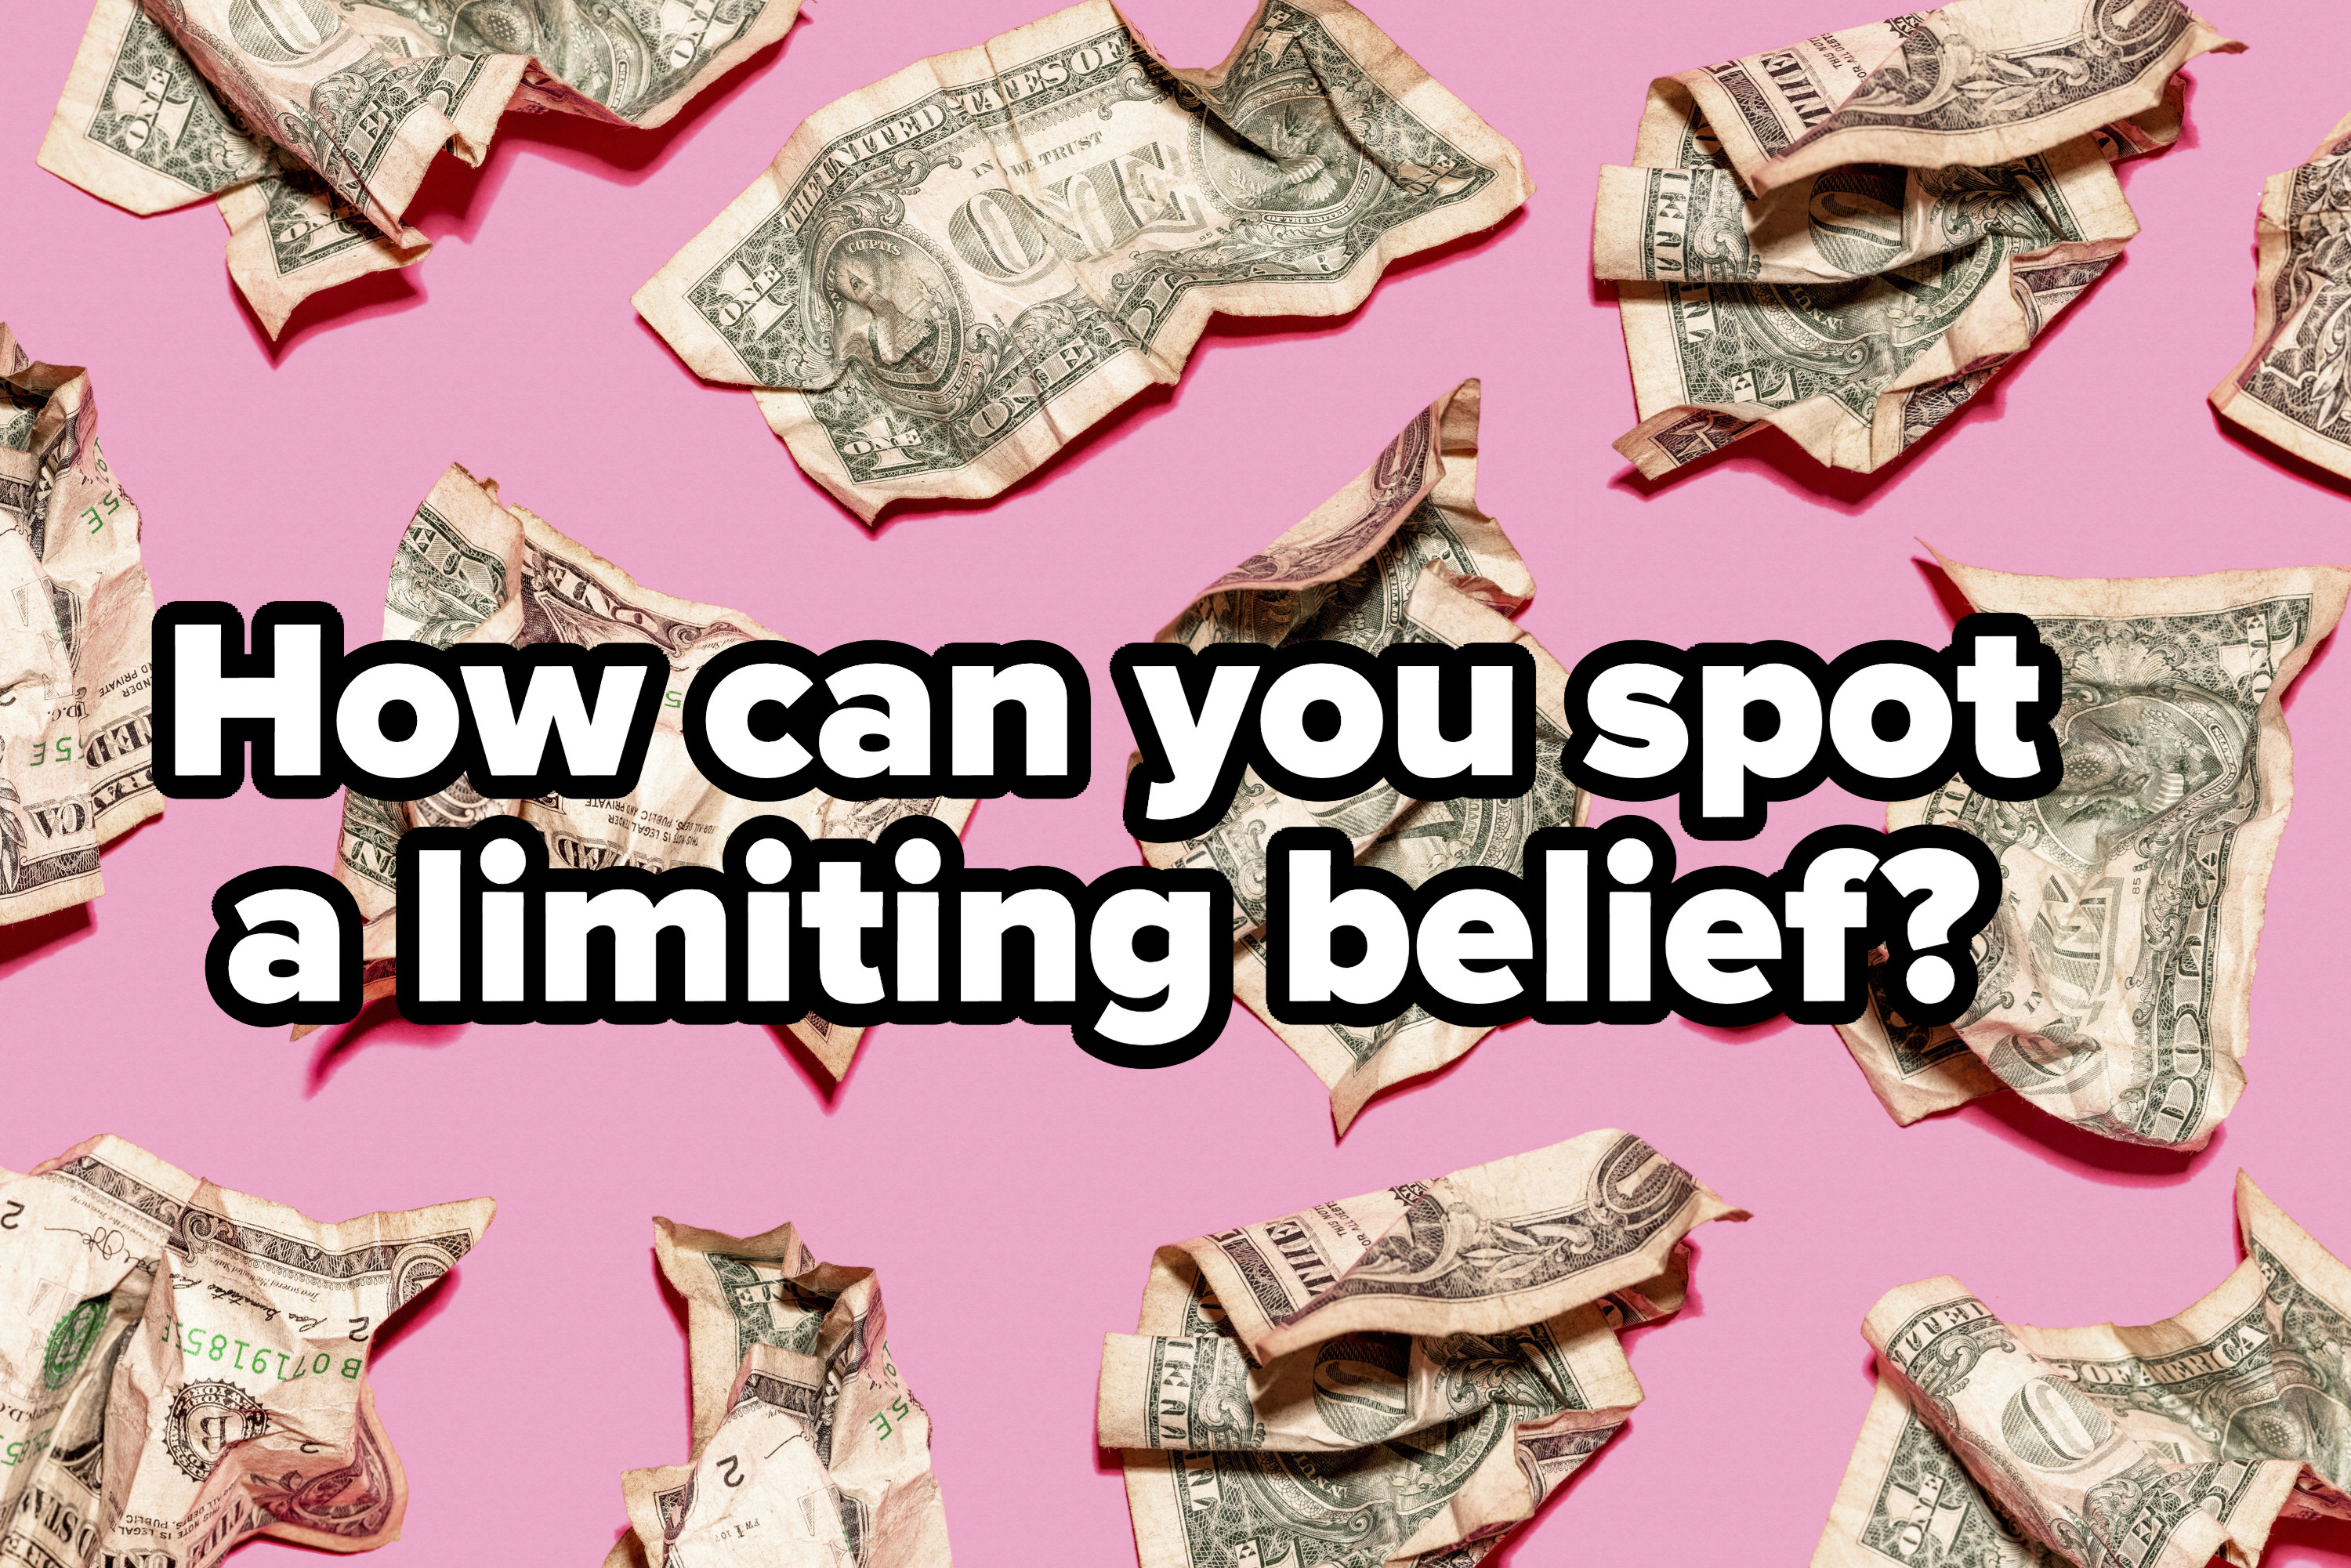 How can you spot a limiting belief